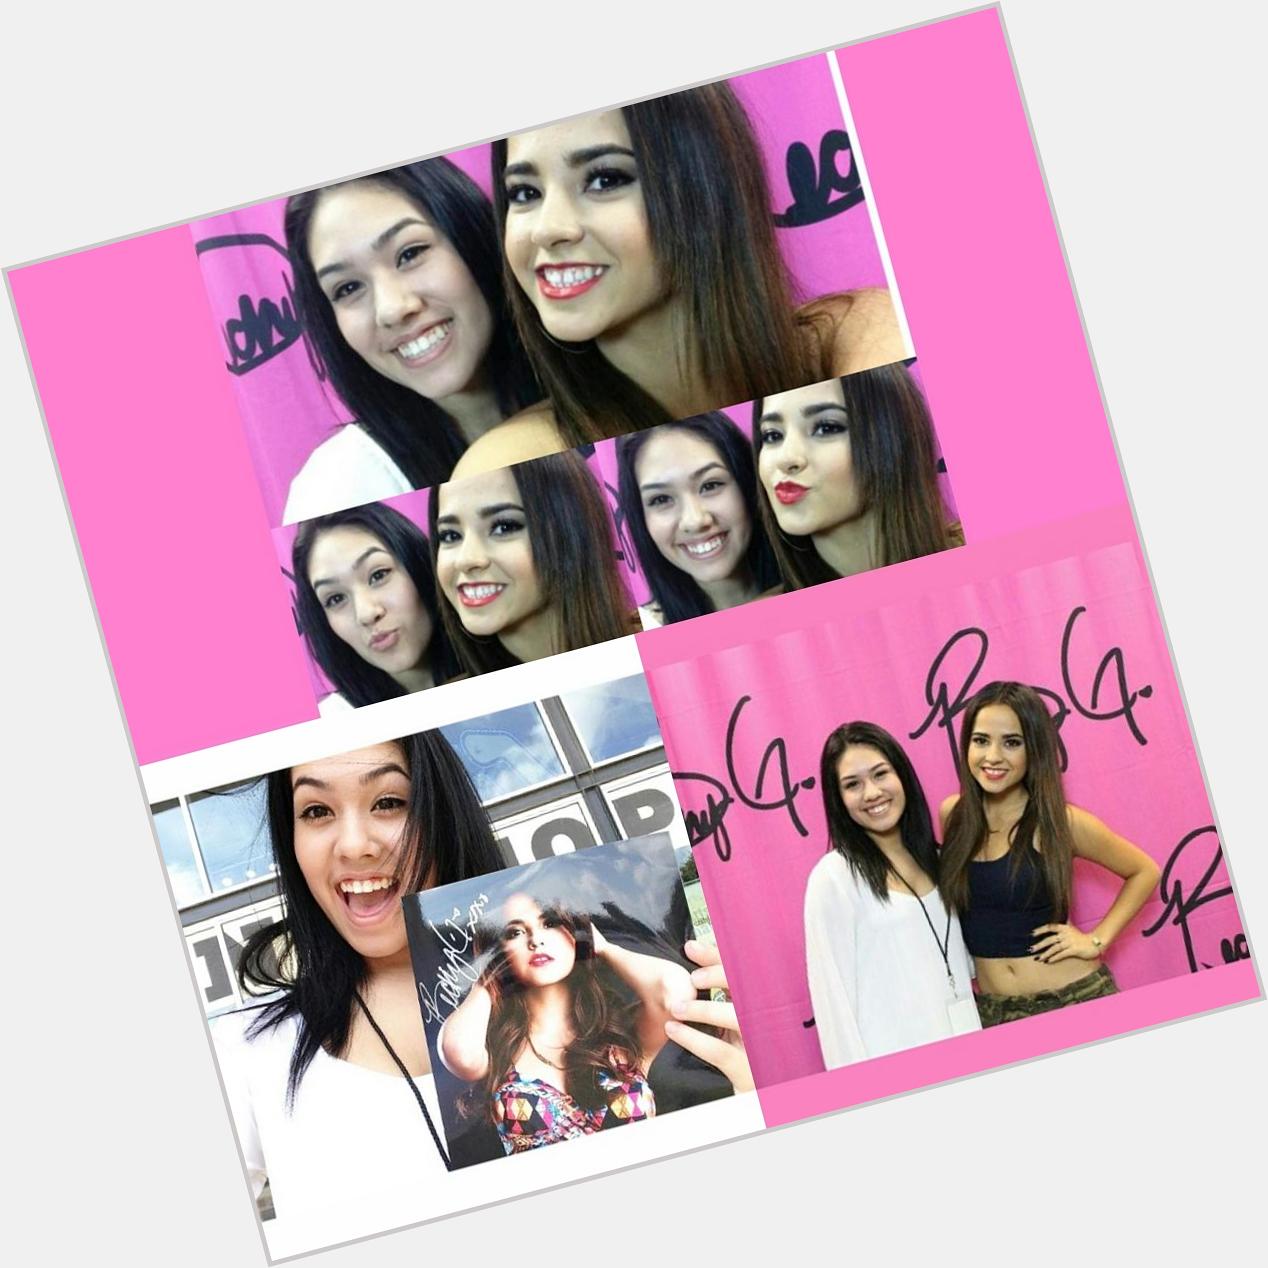 Happy 18th birthday to my homegirl who is famous lol. Love You Becky G have a great birthday! (:  